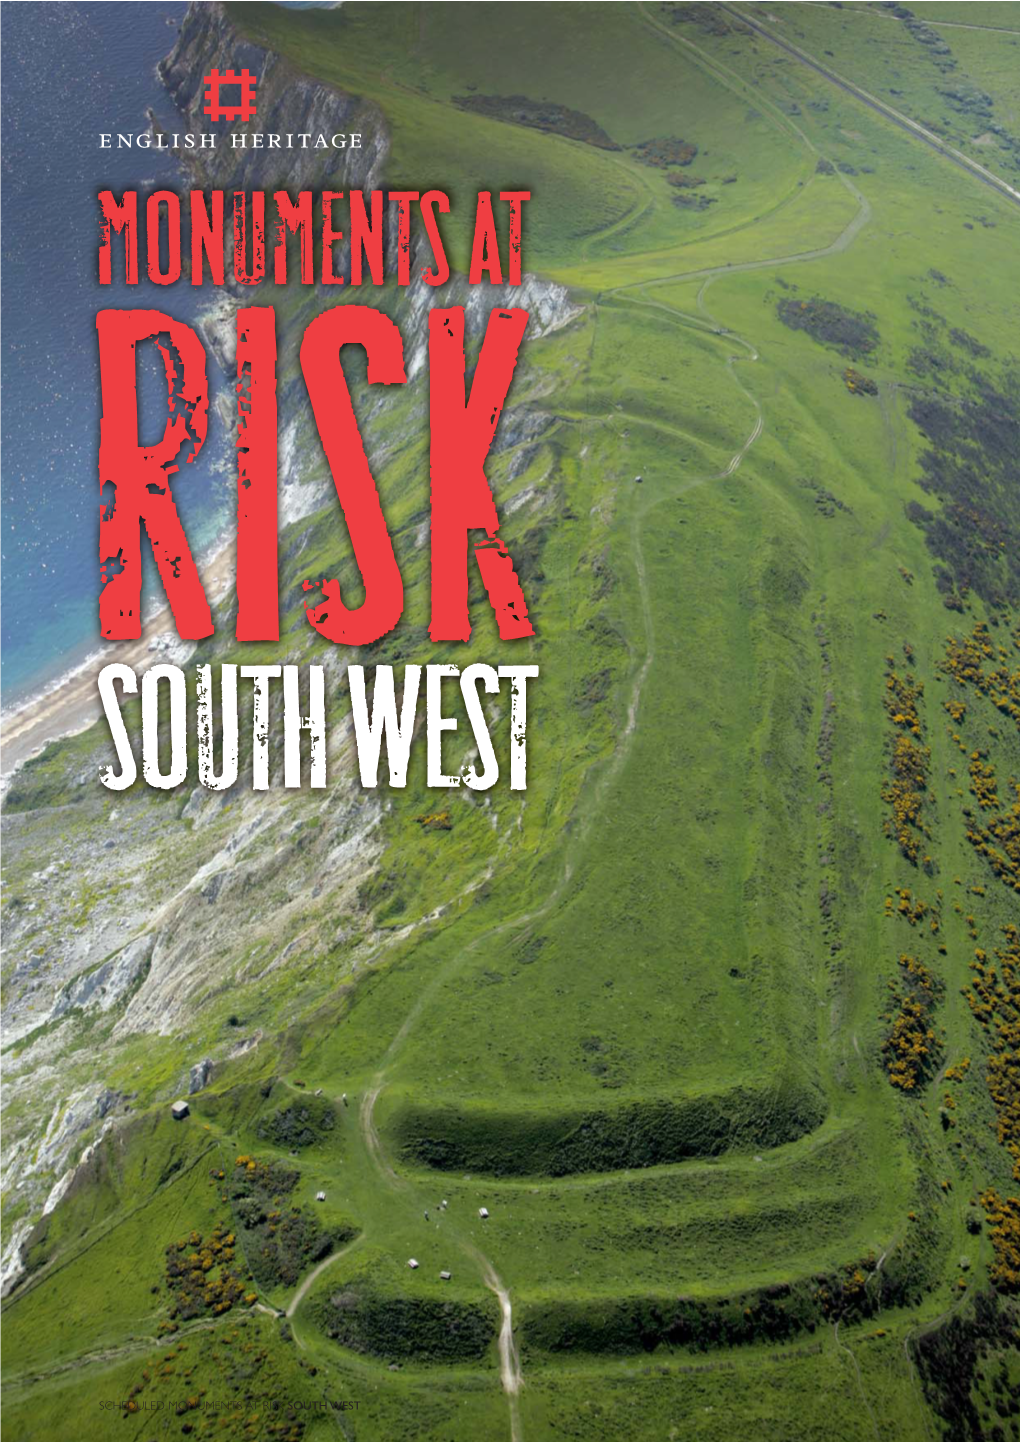 Scheduled Monuments at Risk: South West Region